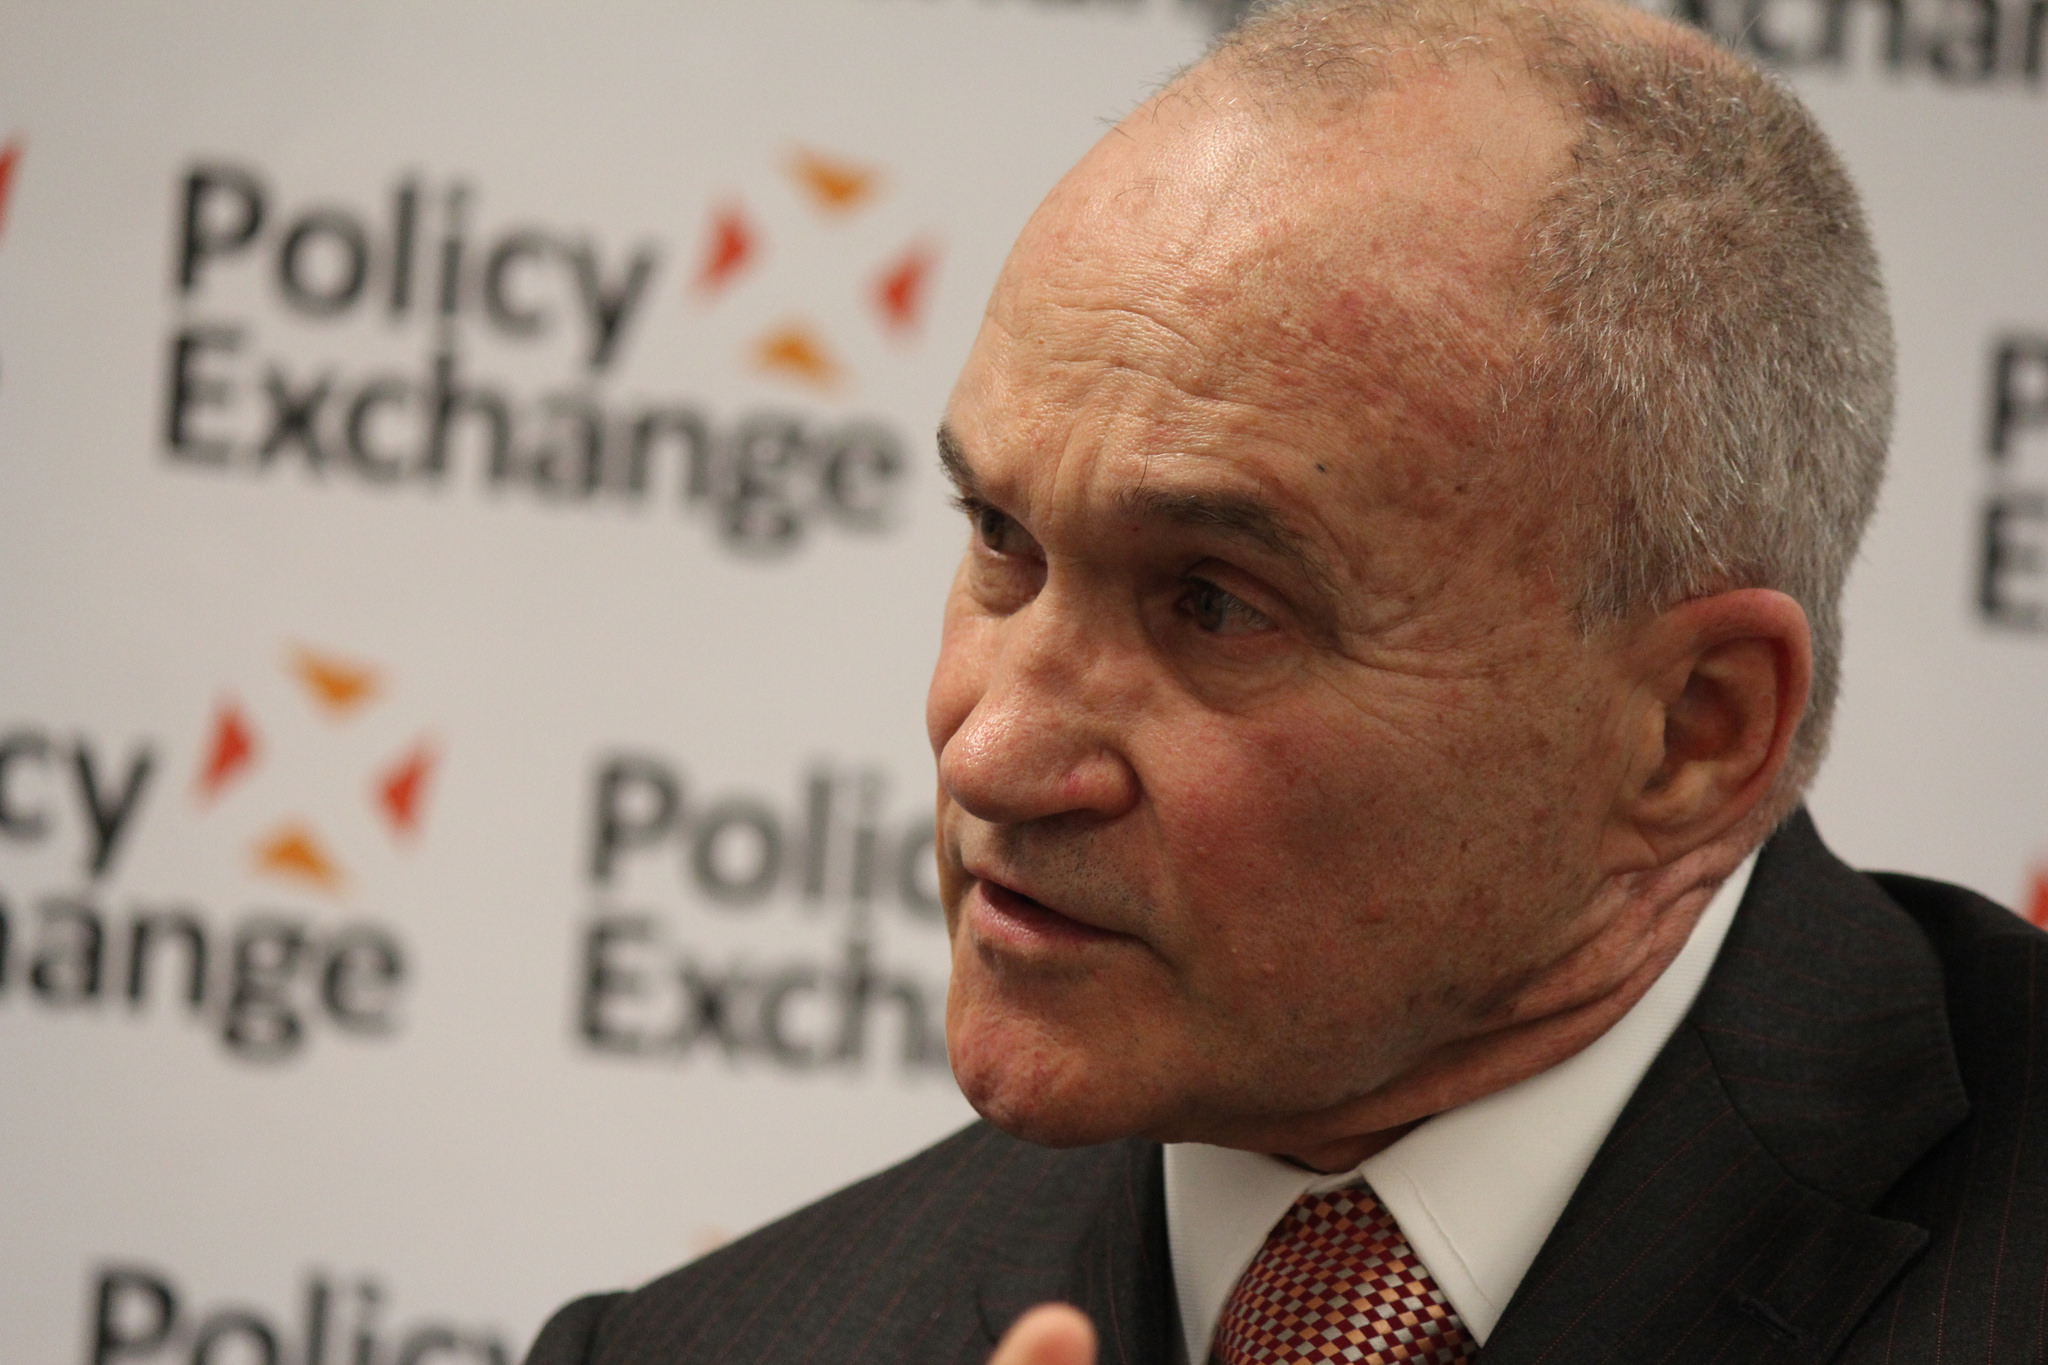 Former NYPD Commissioner Ray Kelly. (Photo credit: Policy Exchange/Flickr)